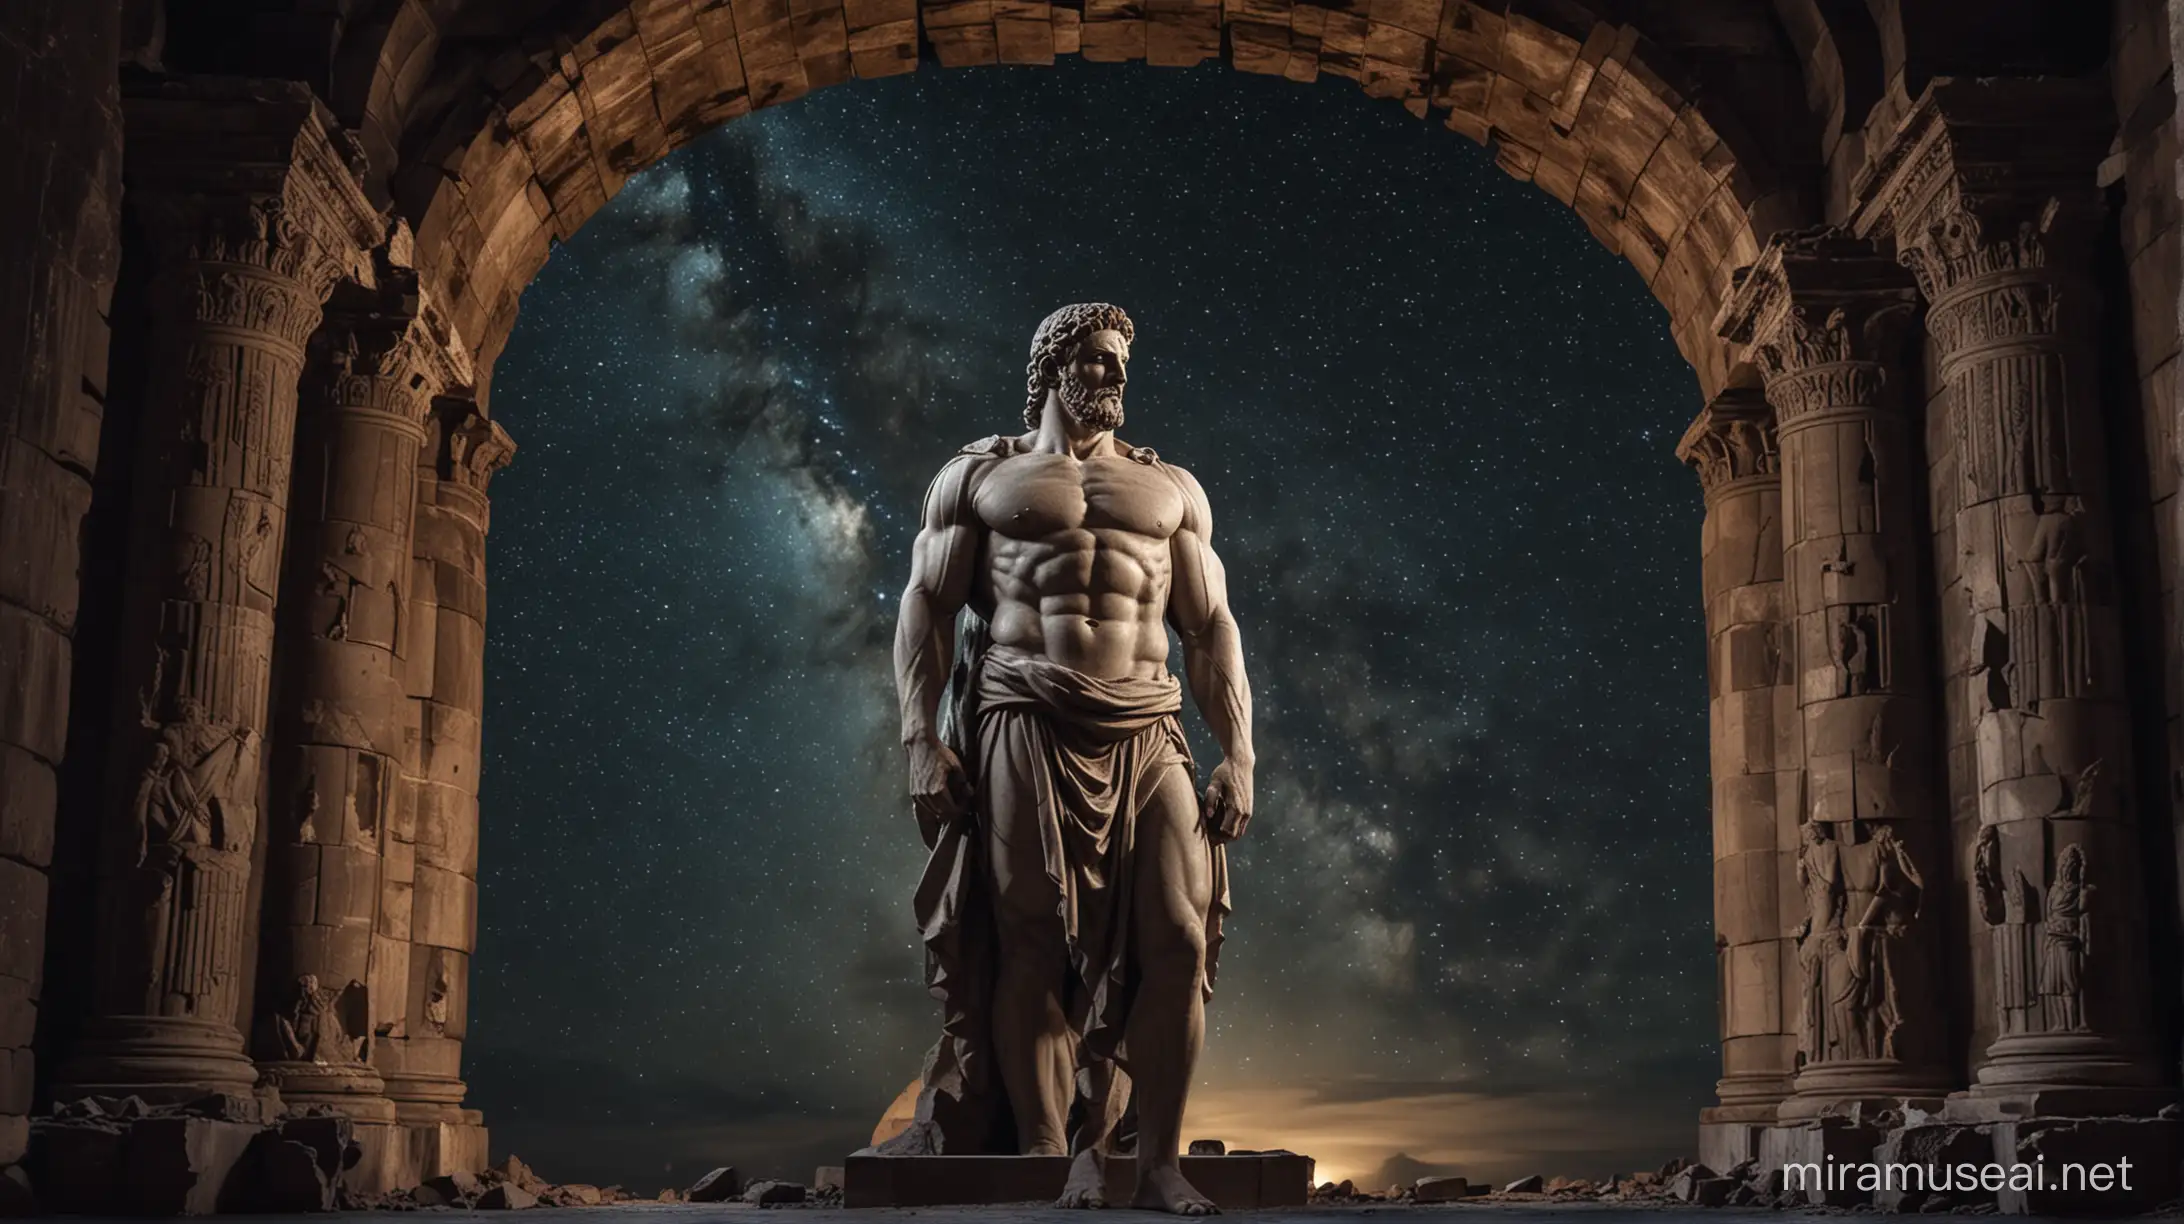 Stoicism, Motivation, stoic muscular STATUE outside , dark, stoic background horizontal. against the background of the dark hole falling stars, he enters an ancient building